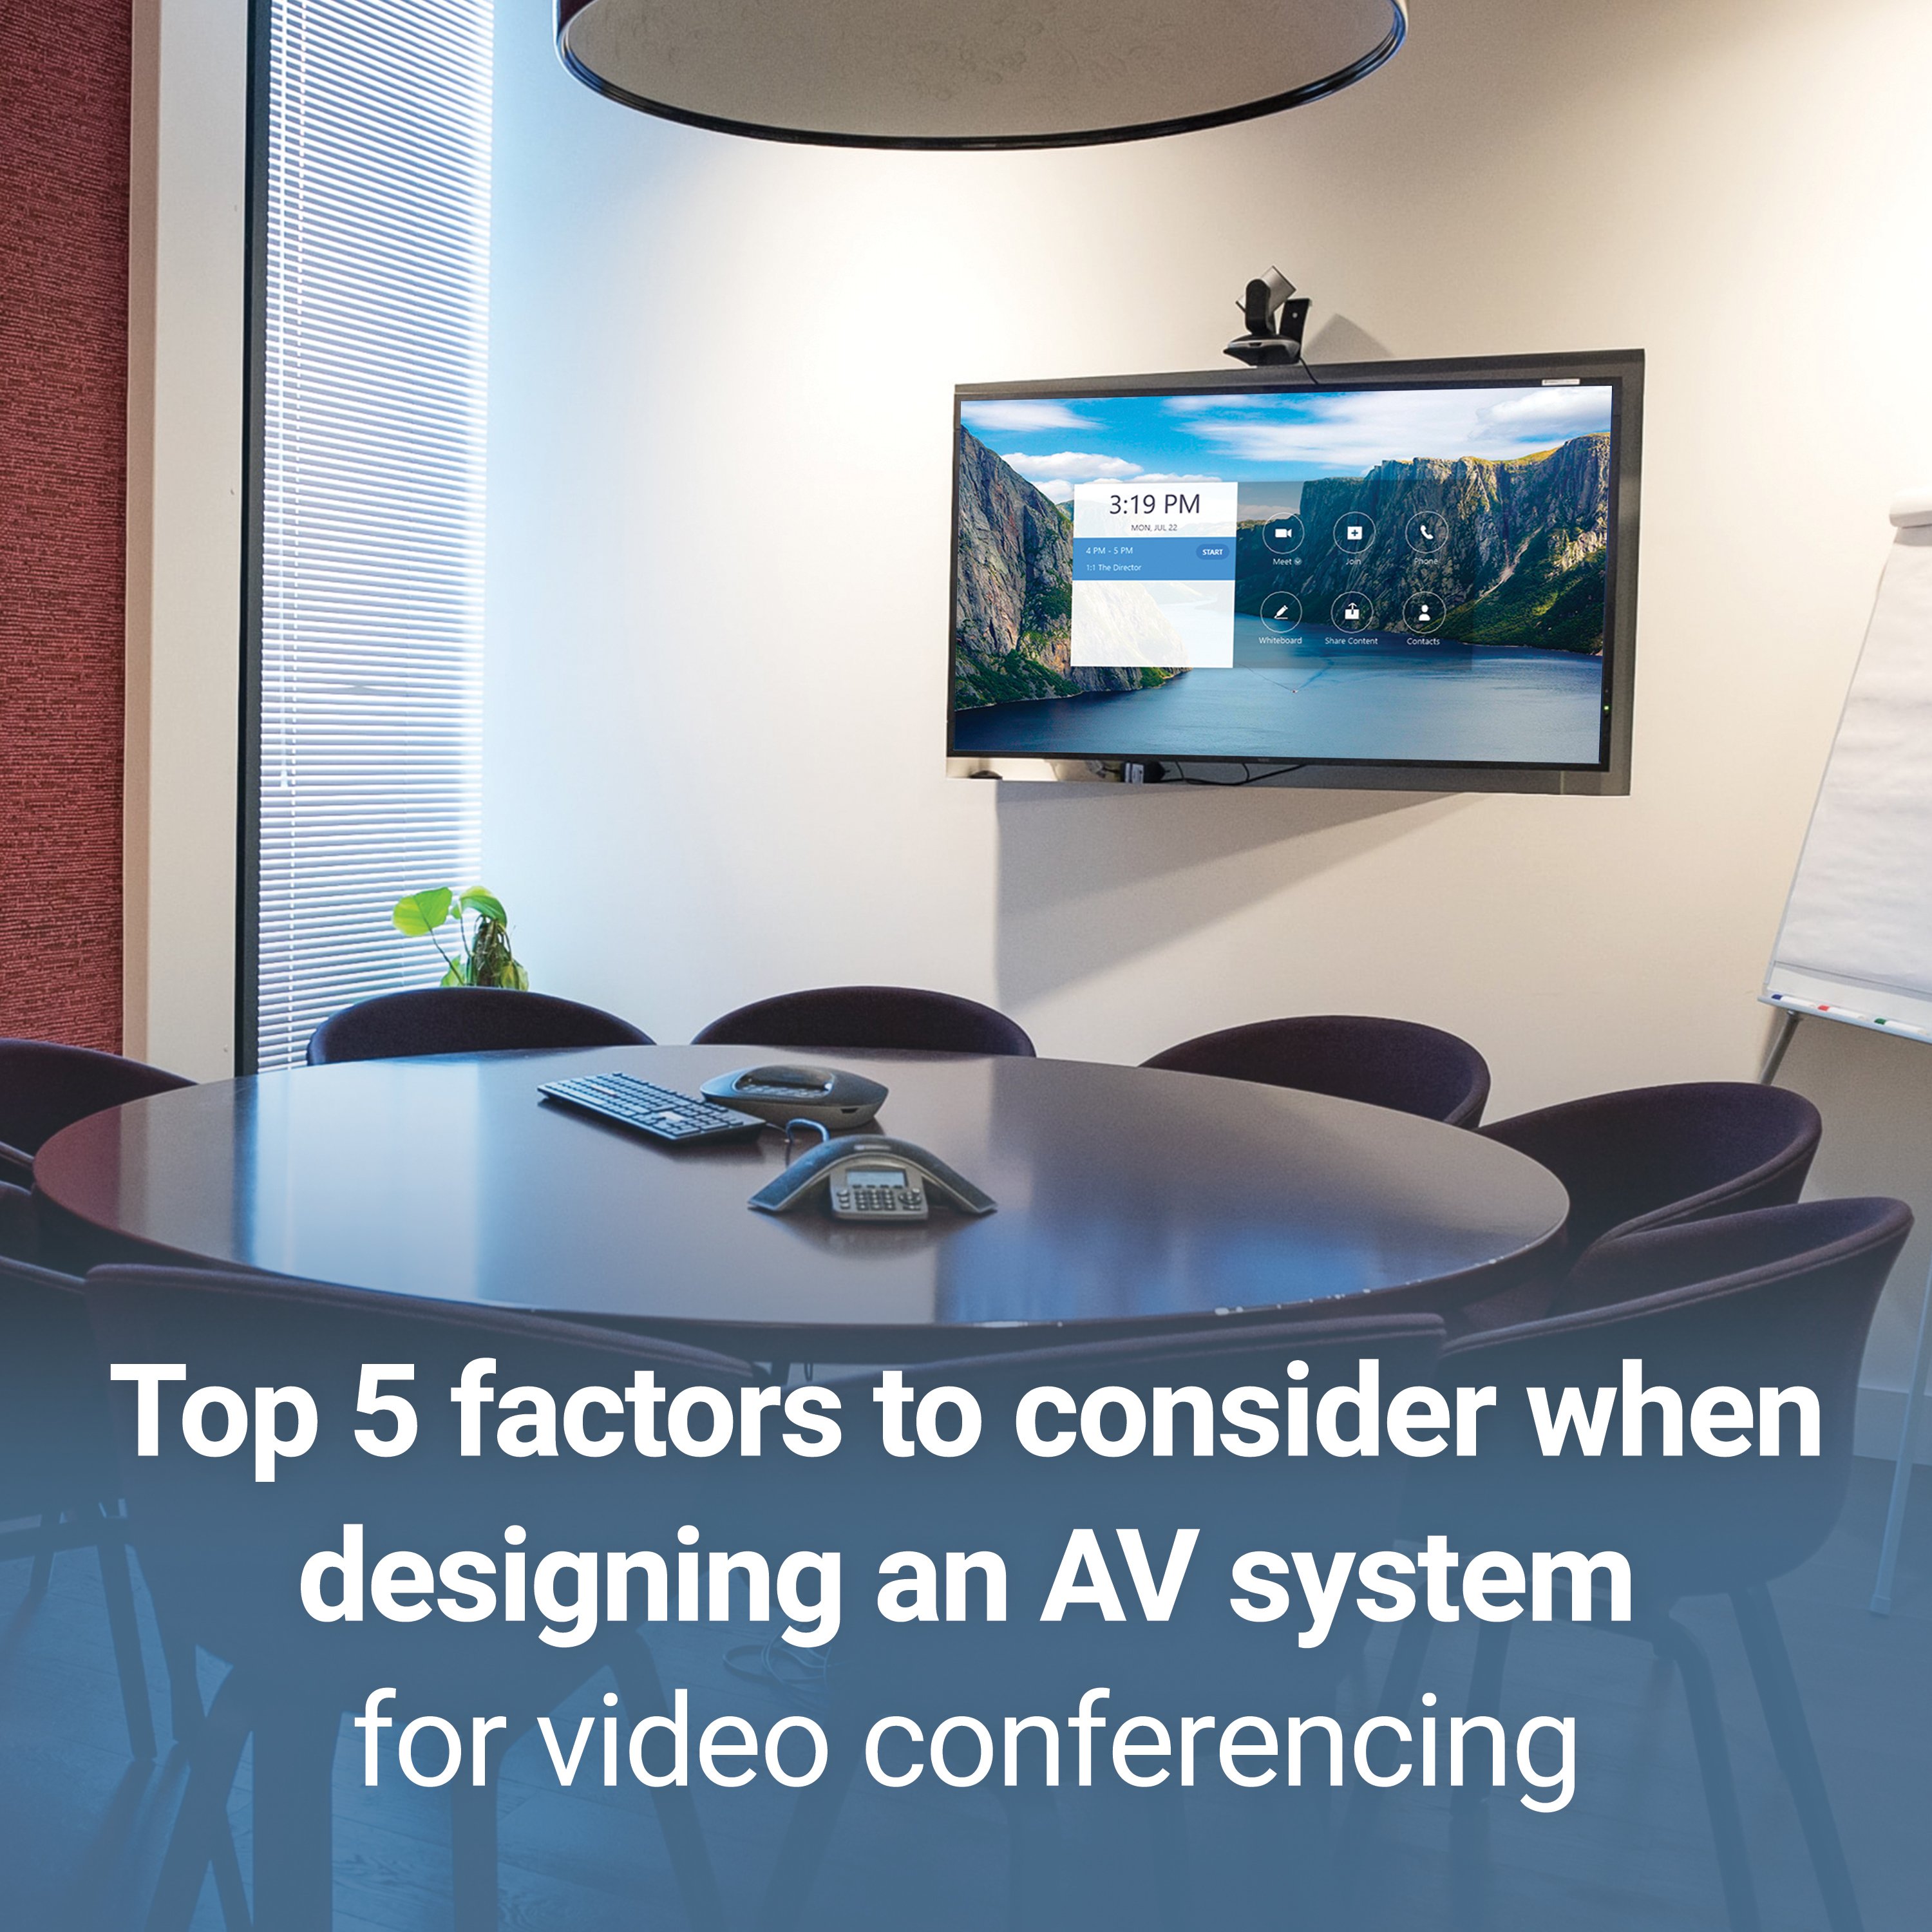 5 Factors to Consider When Designing AV Systems for Video Conferencing